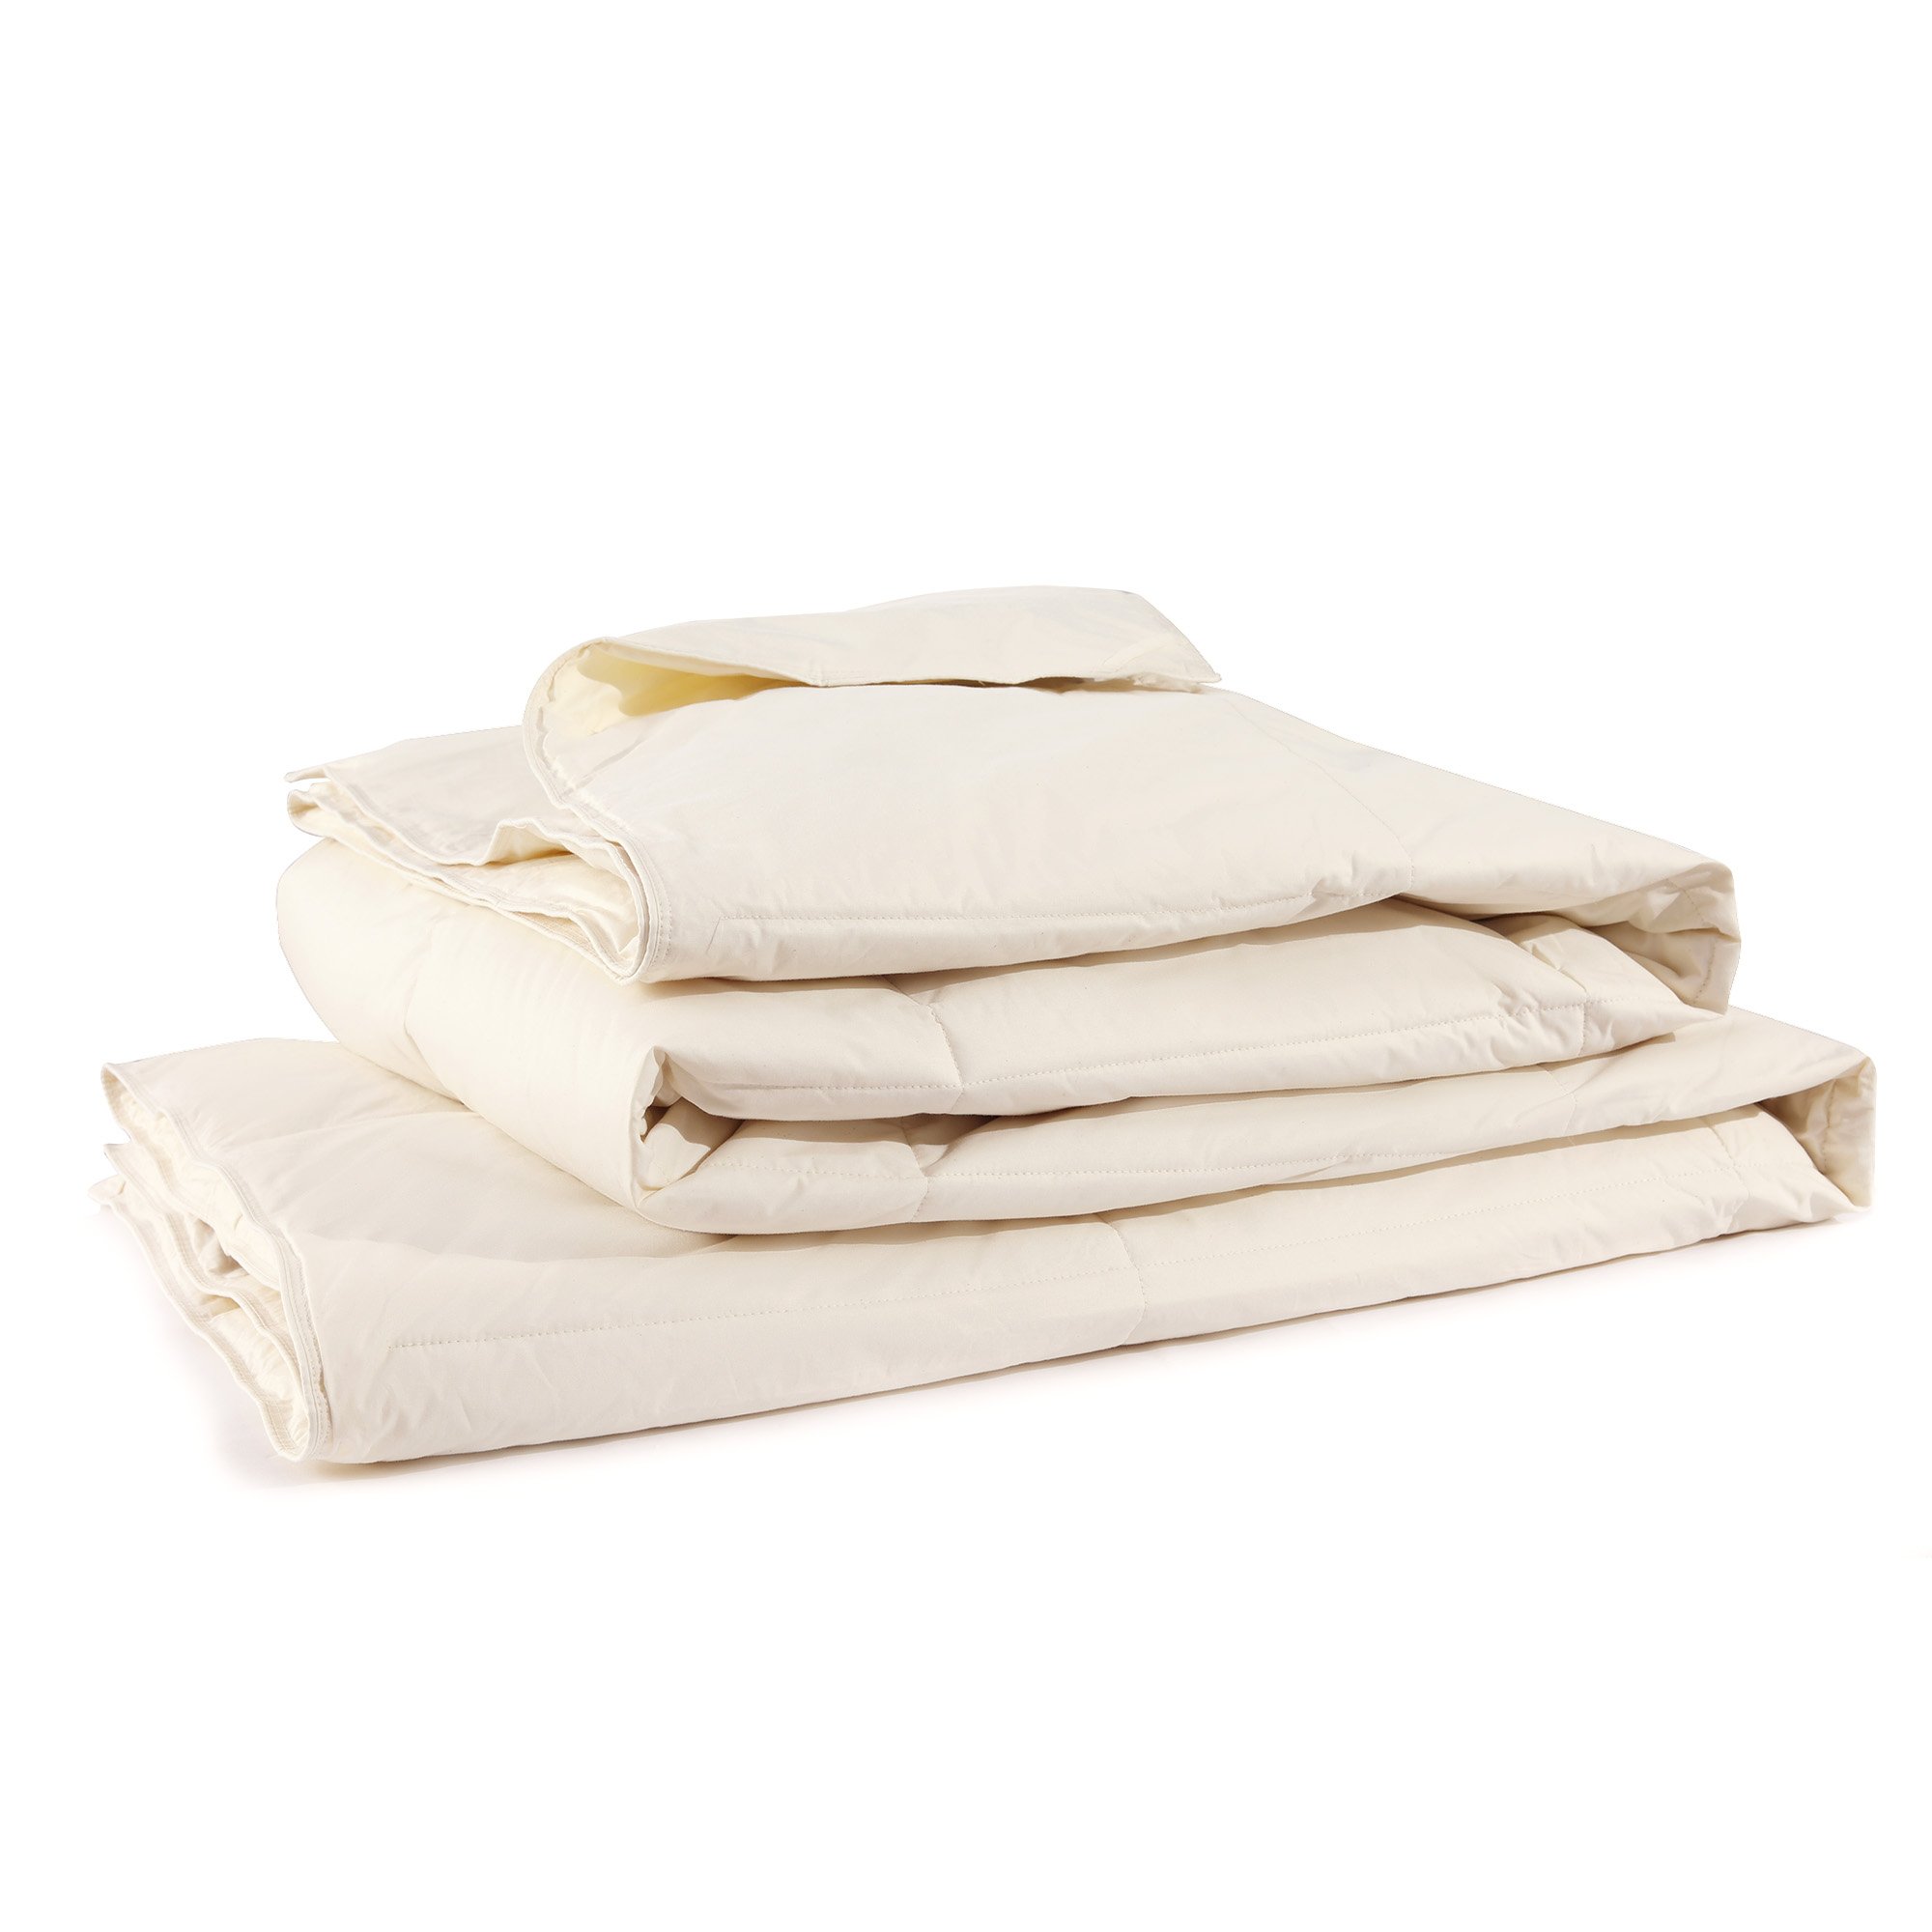 Peace Nest Lightweight Down Comforter with 100% Organic Cotton, King size - image 5 of 5